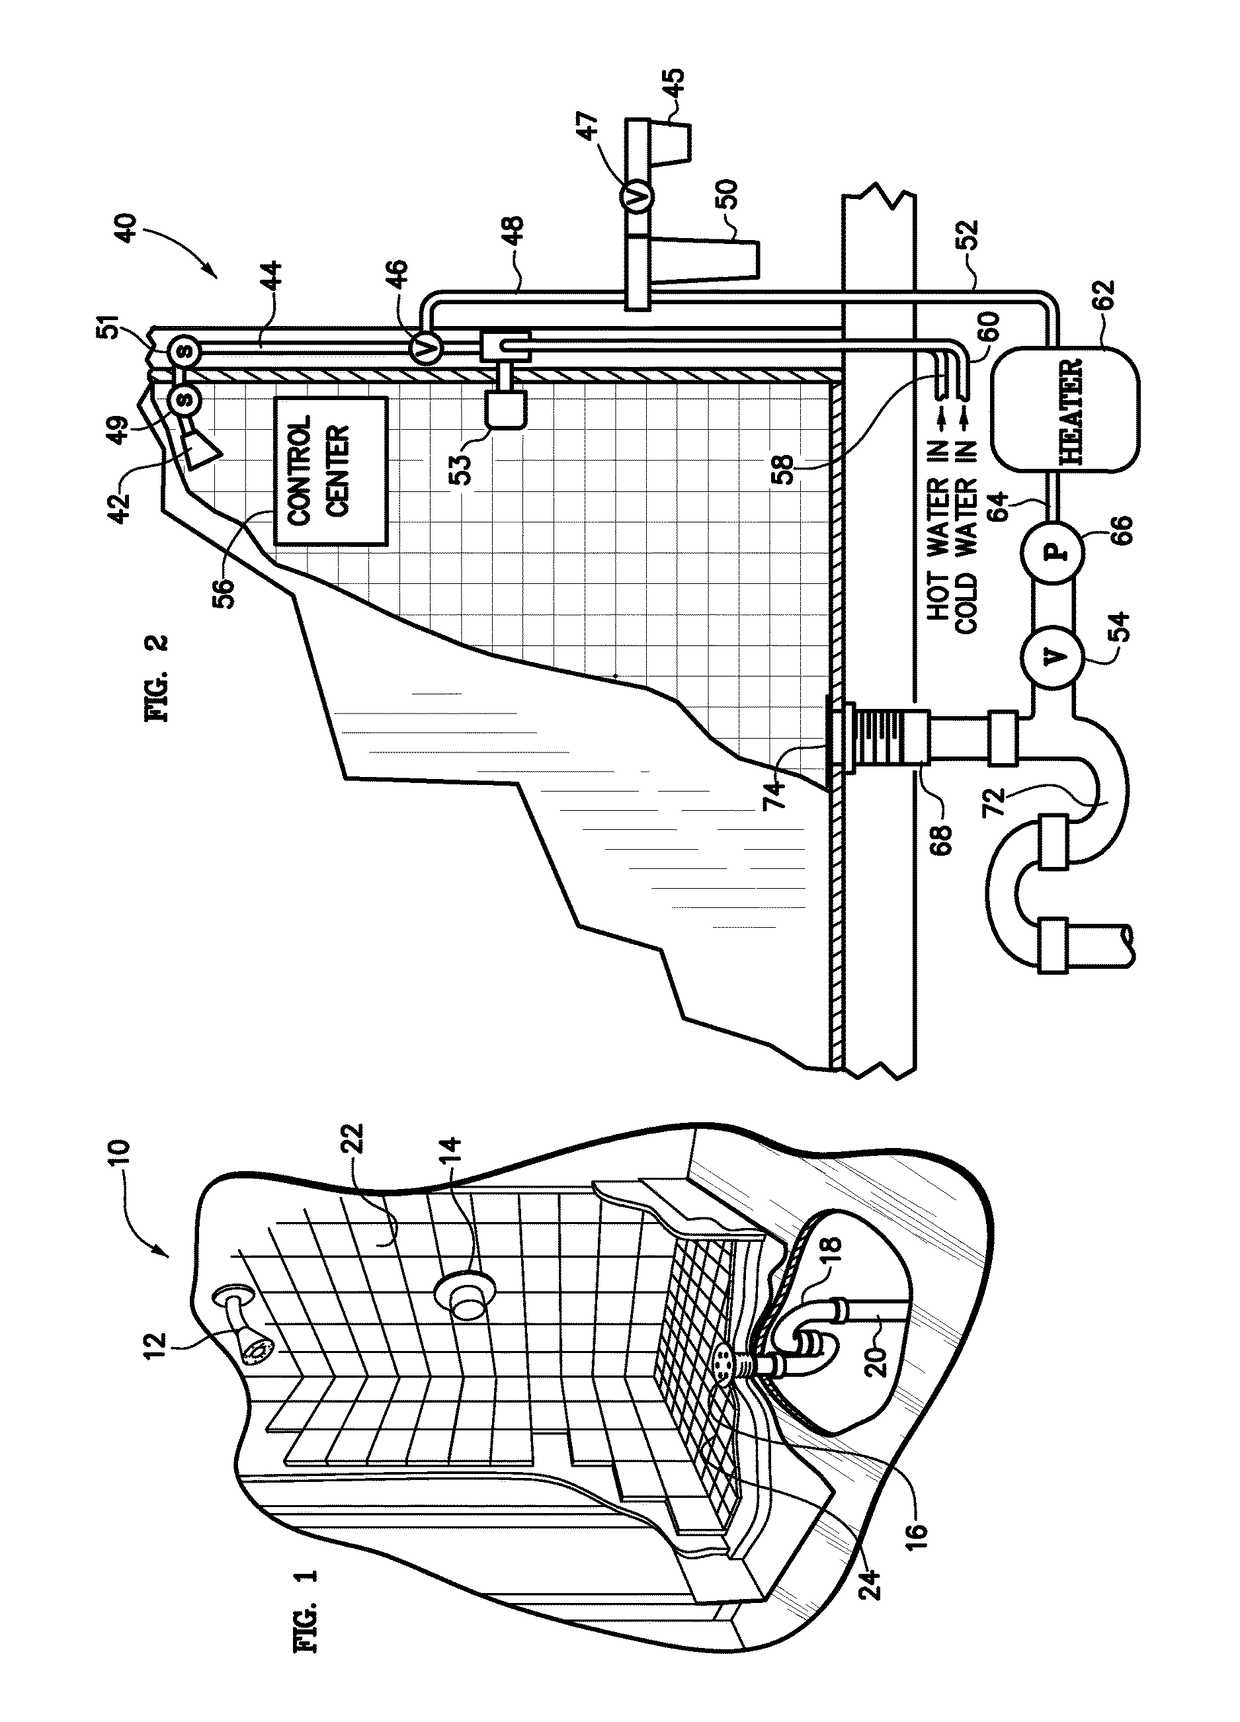 Apparatus for Recycling Water for a Shower or Bath